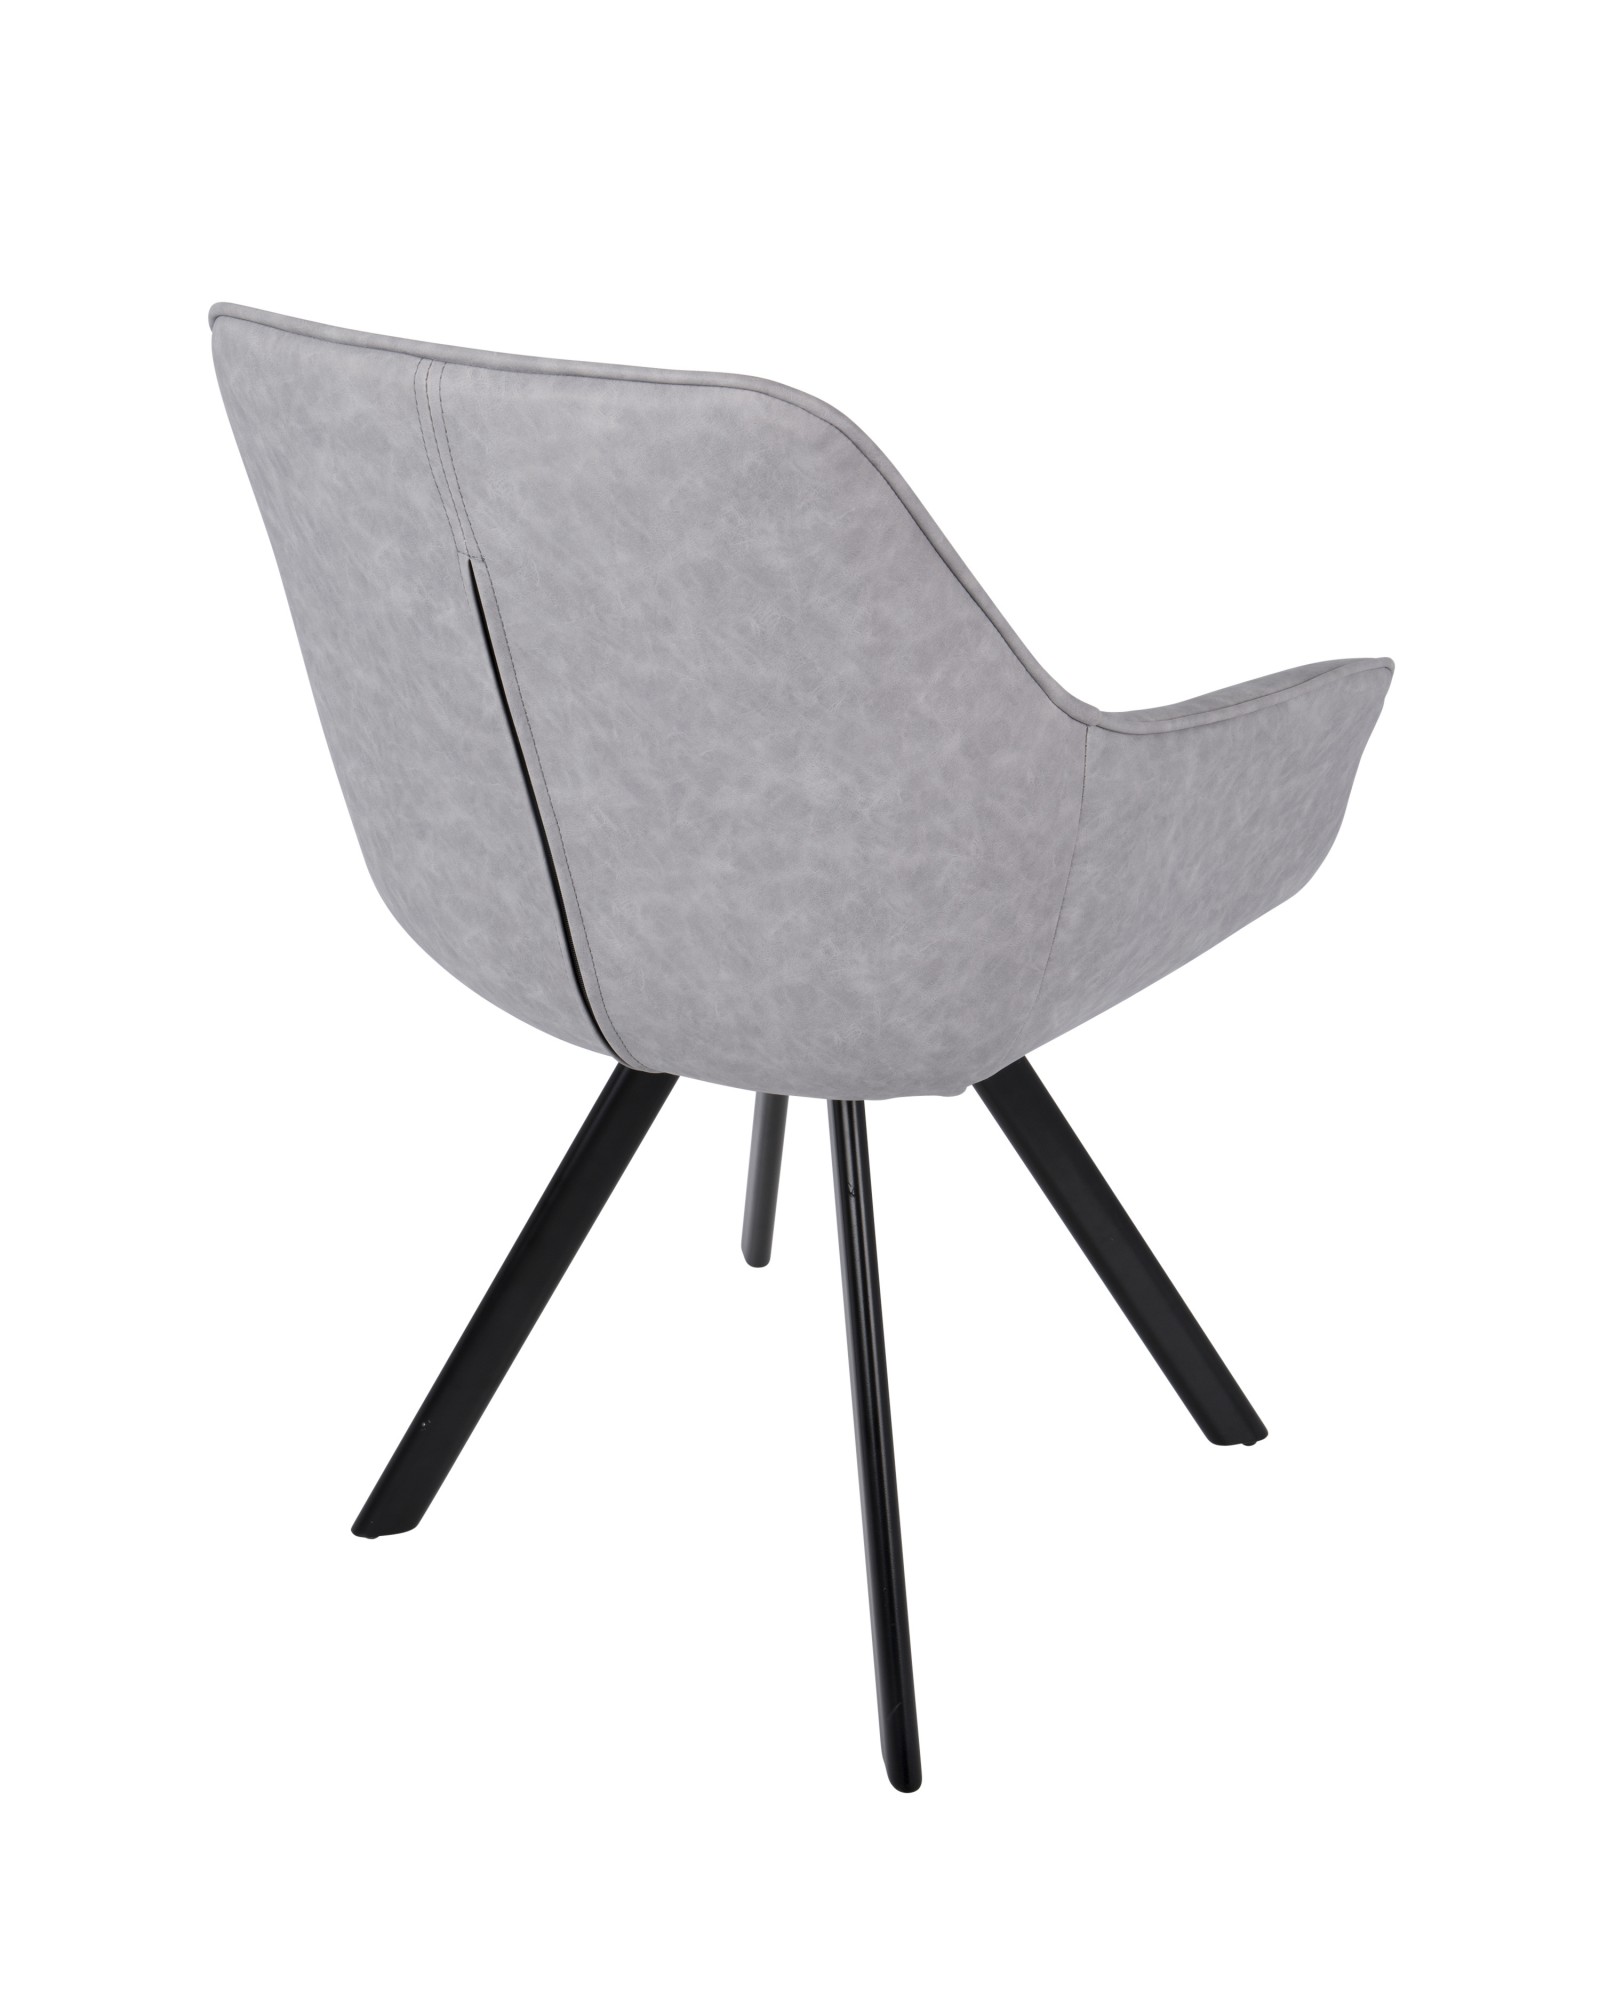 Outlaw Industrial Dining/Accent Chair in Grey Faux Leather - Set of 2